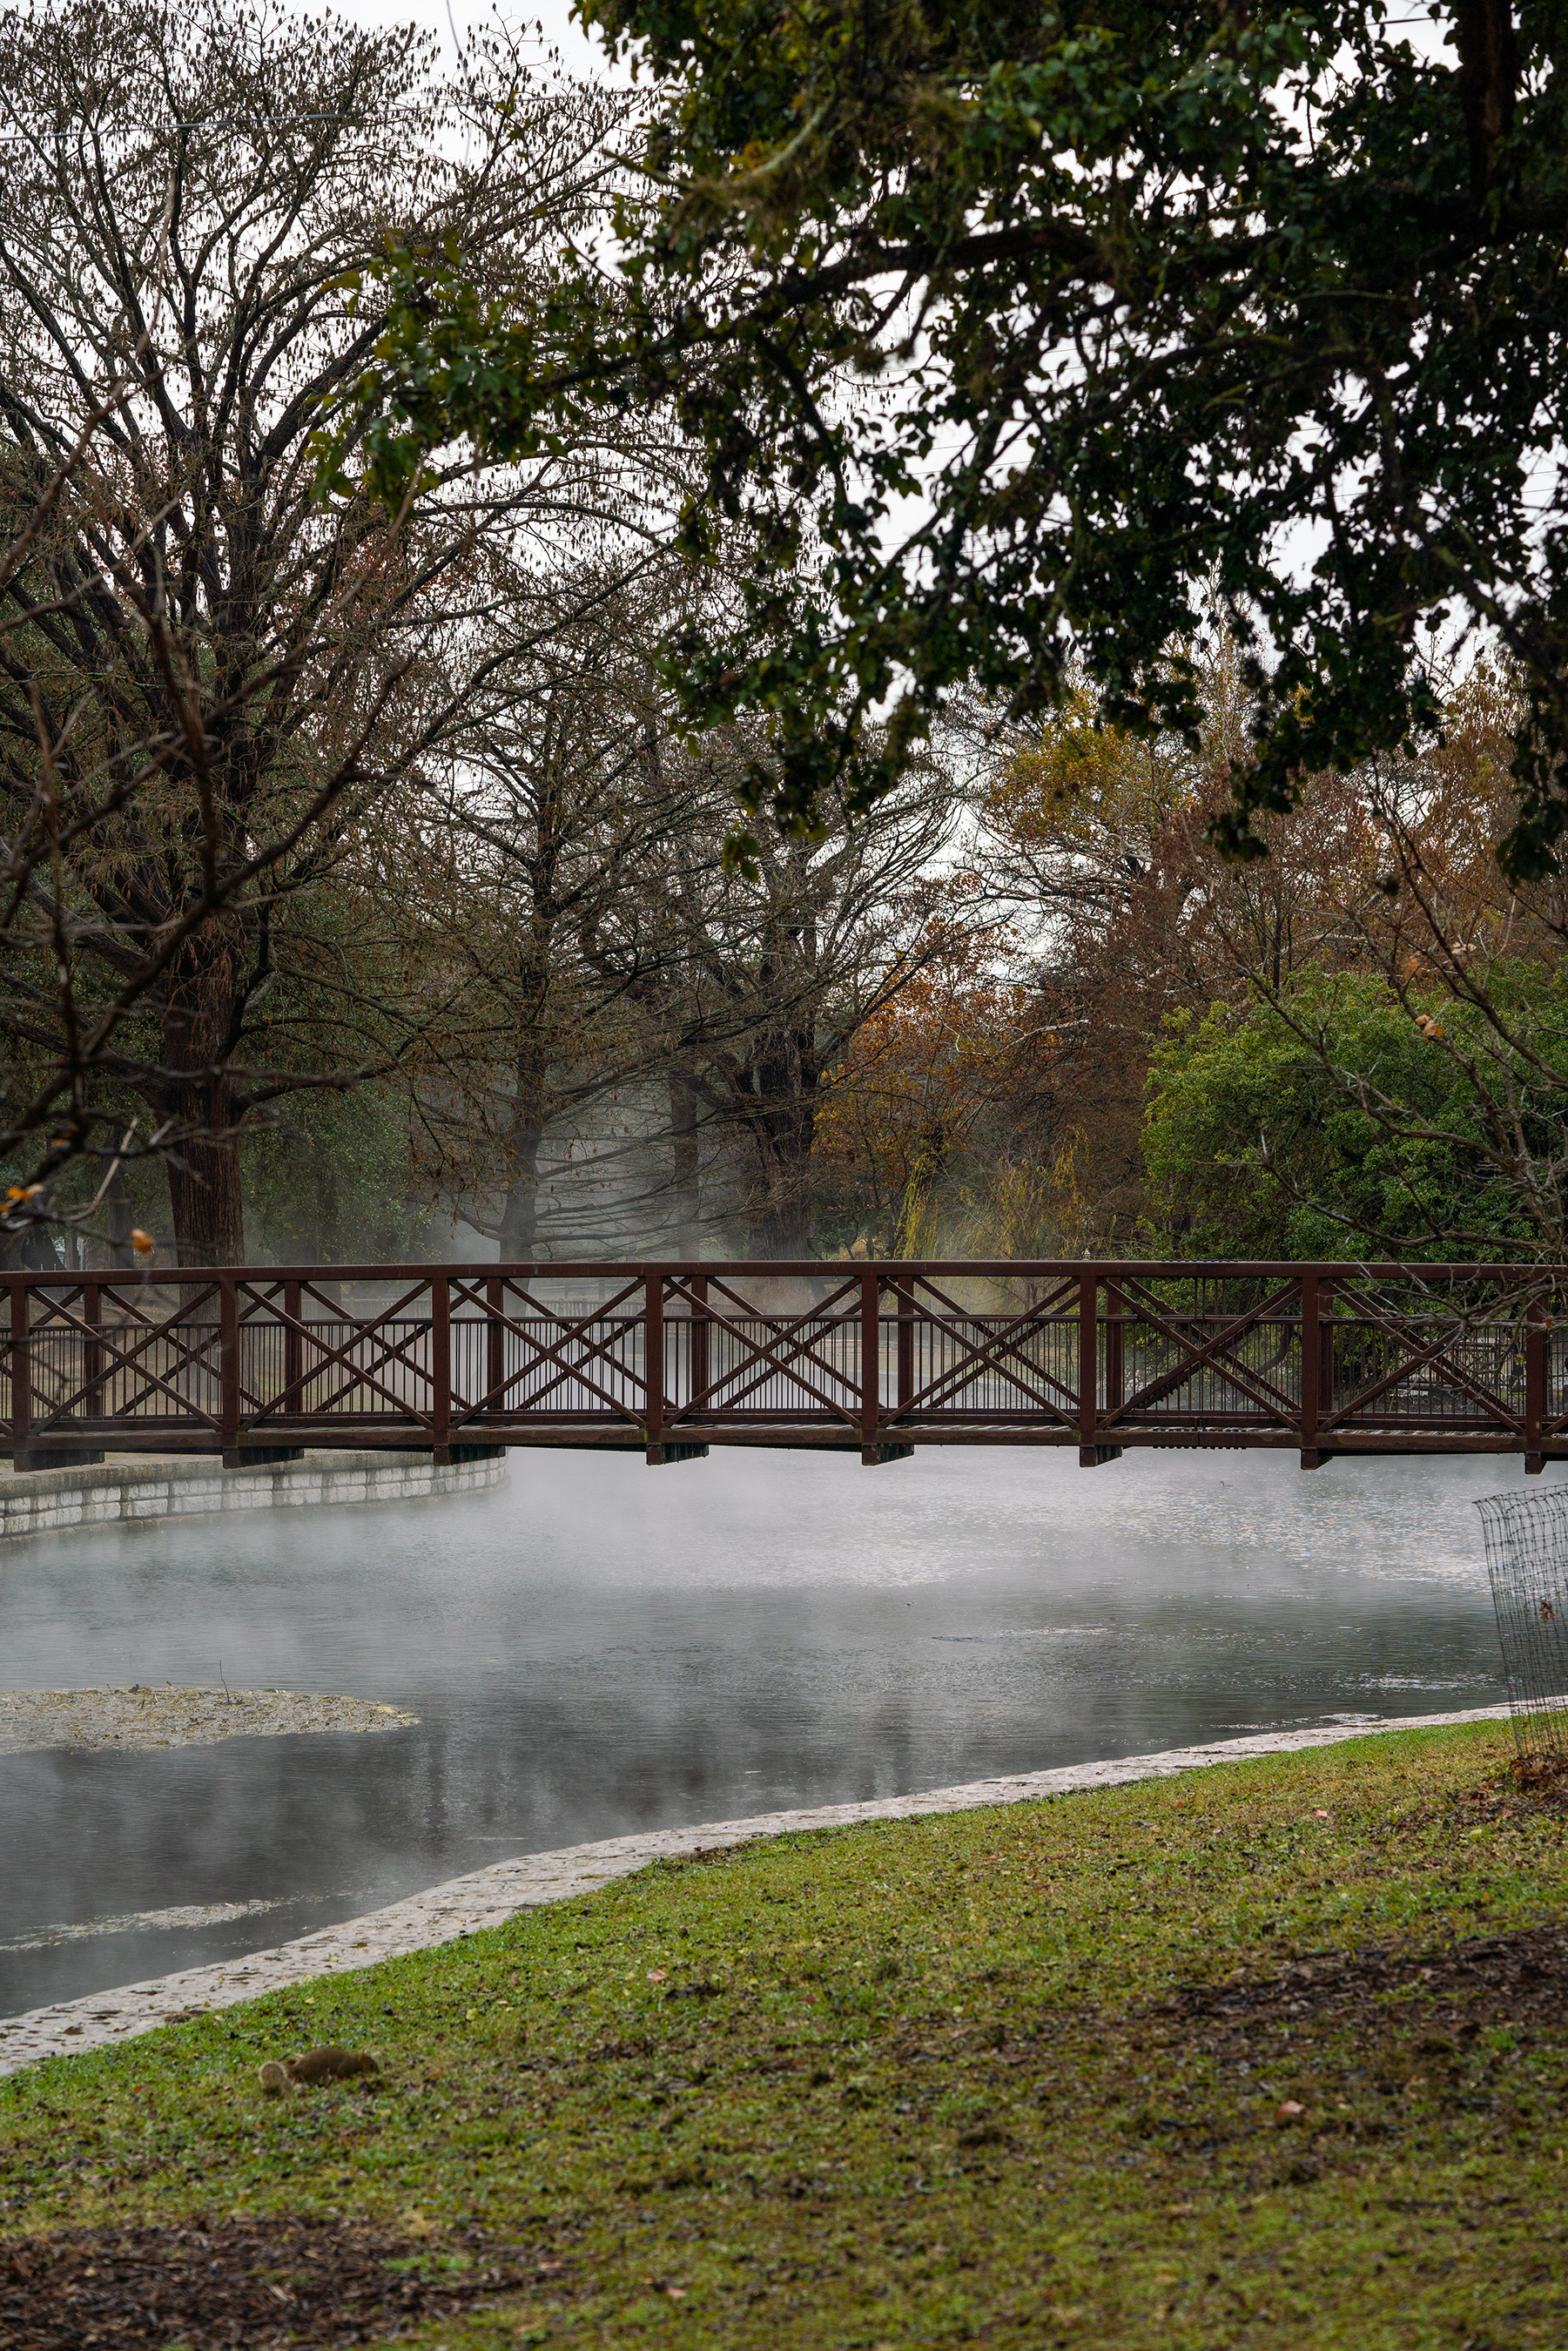 The 72 degree spring-fed lake creates steam on a wintery day. New Braunfels boasts over 550 acres of parks and green space for outdoor recreation.